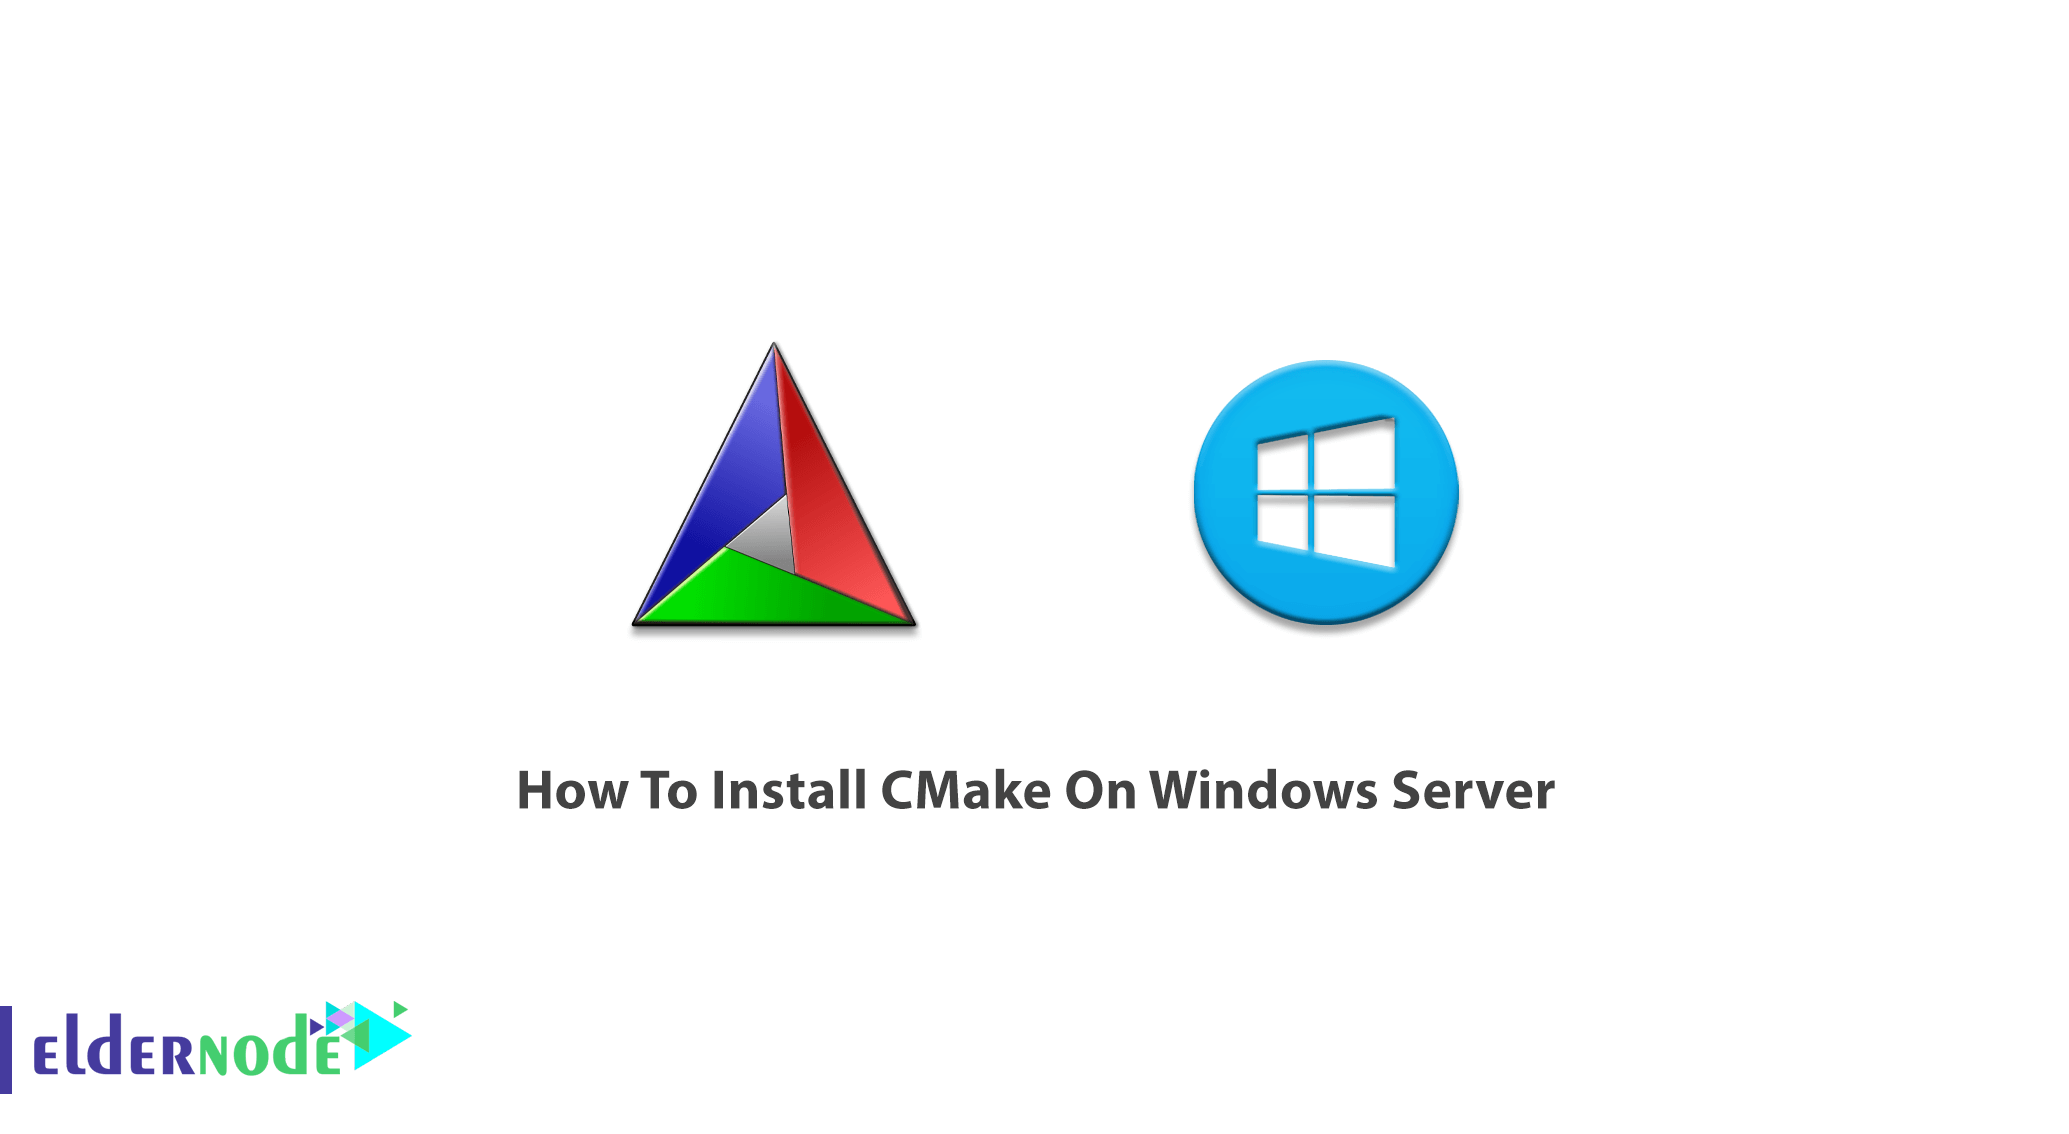 How To Install CMake On Windows Server